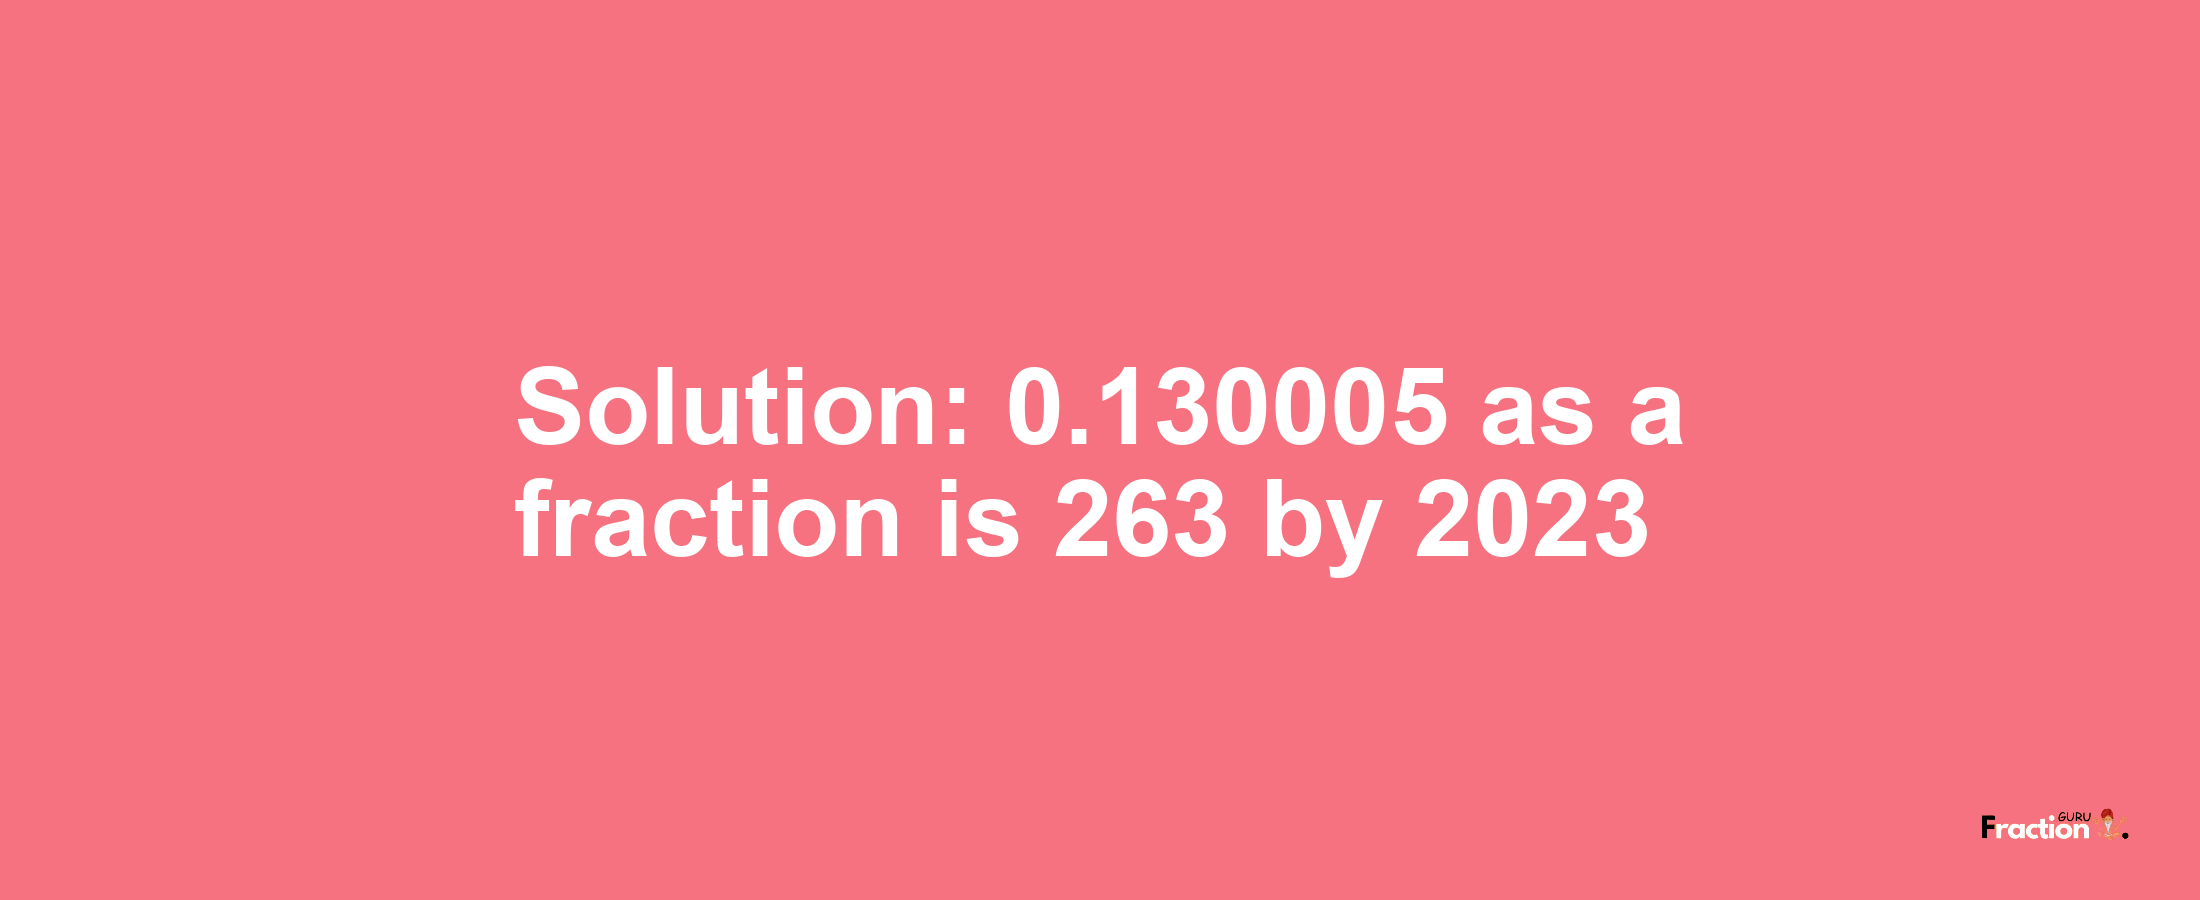 Solution:0.130005 as a fraction is 263/2023